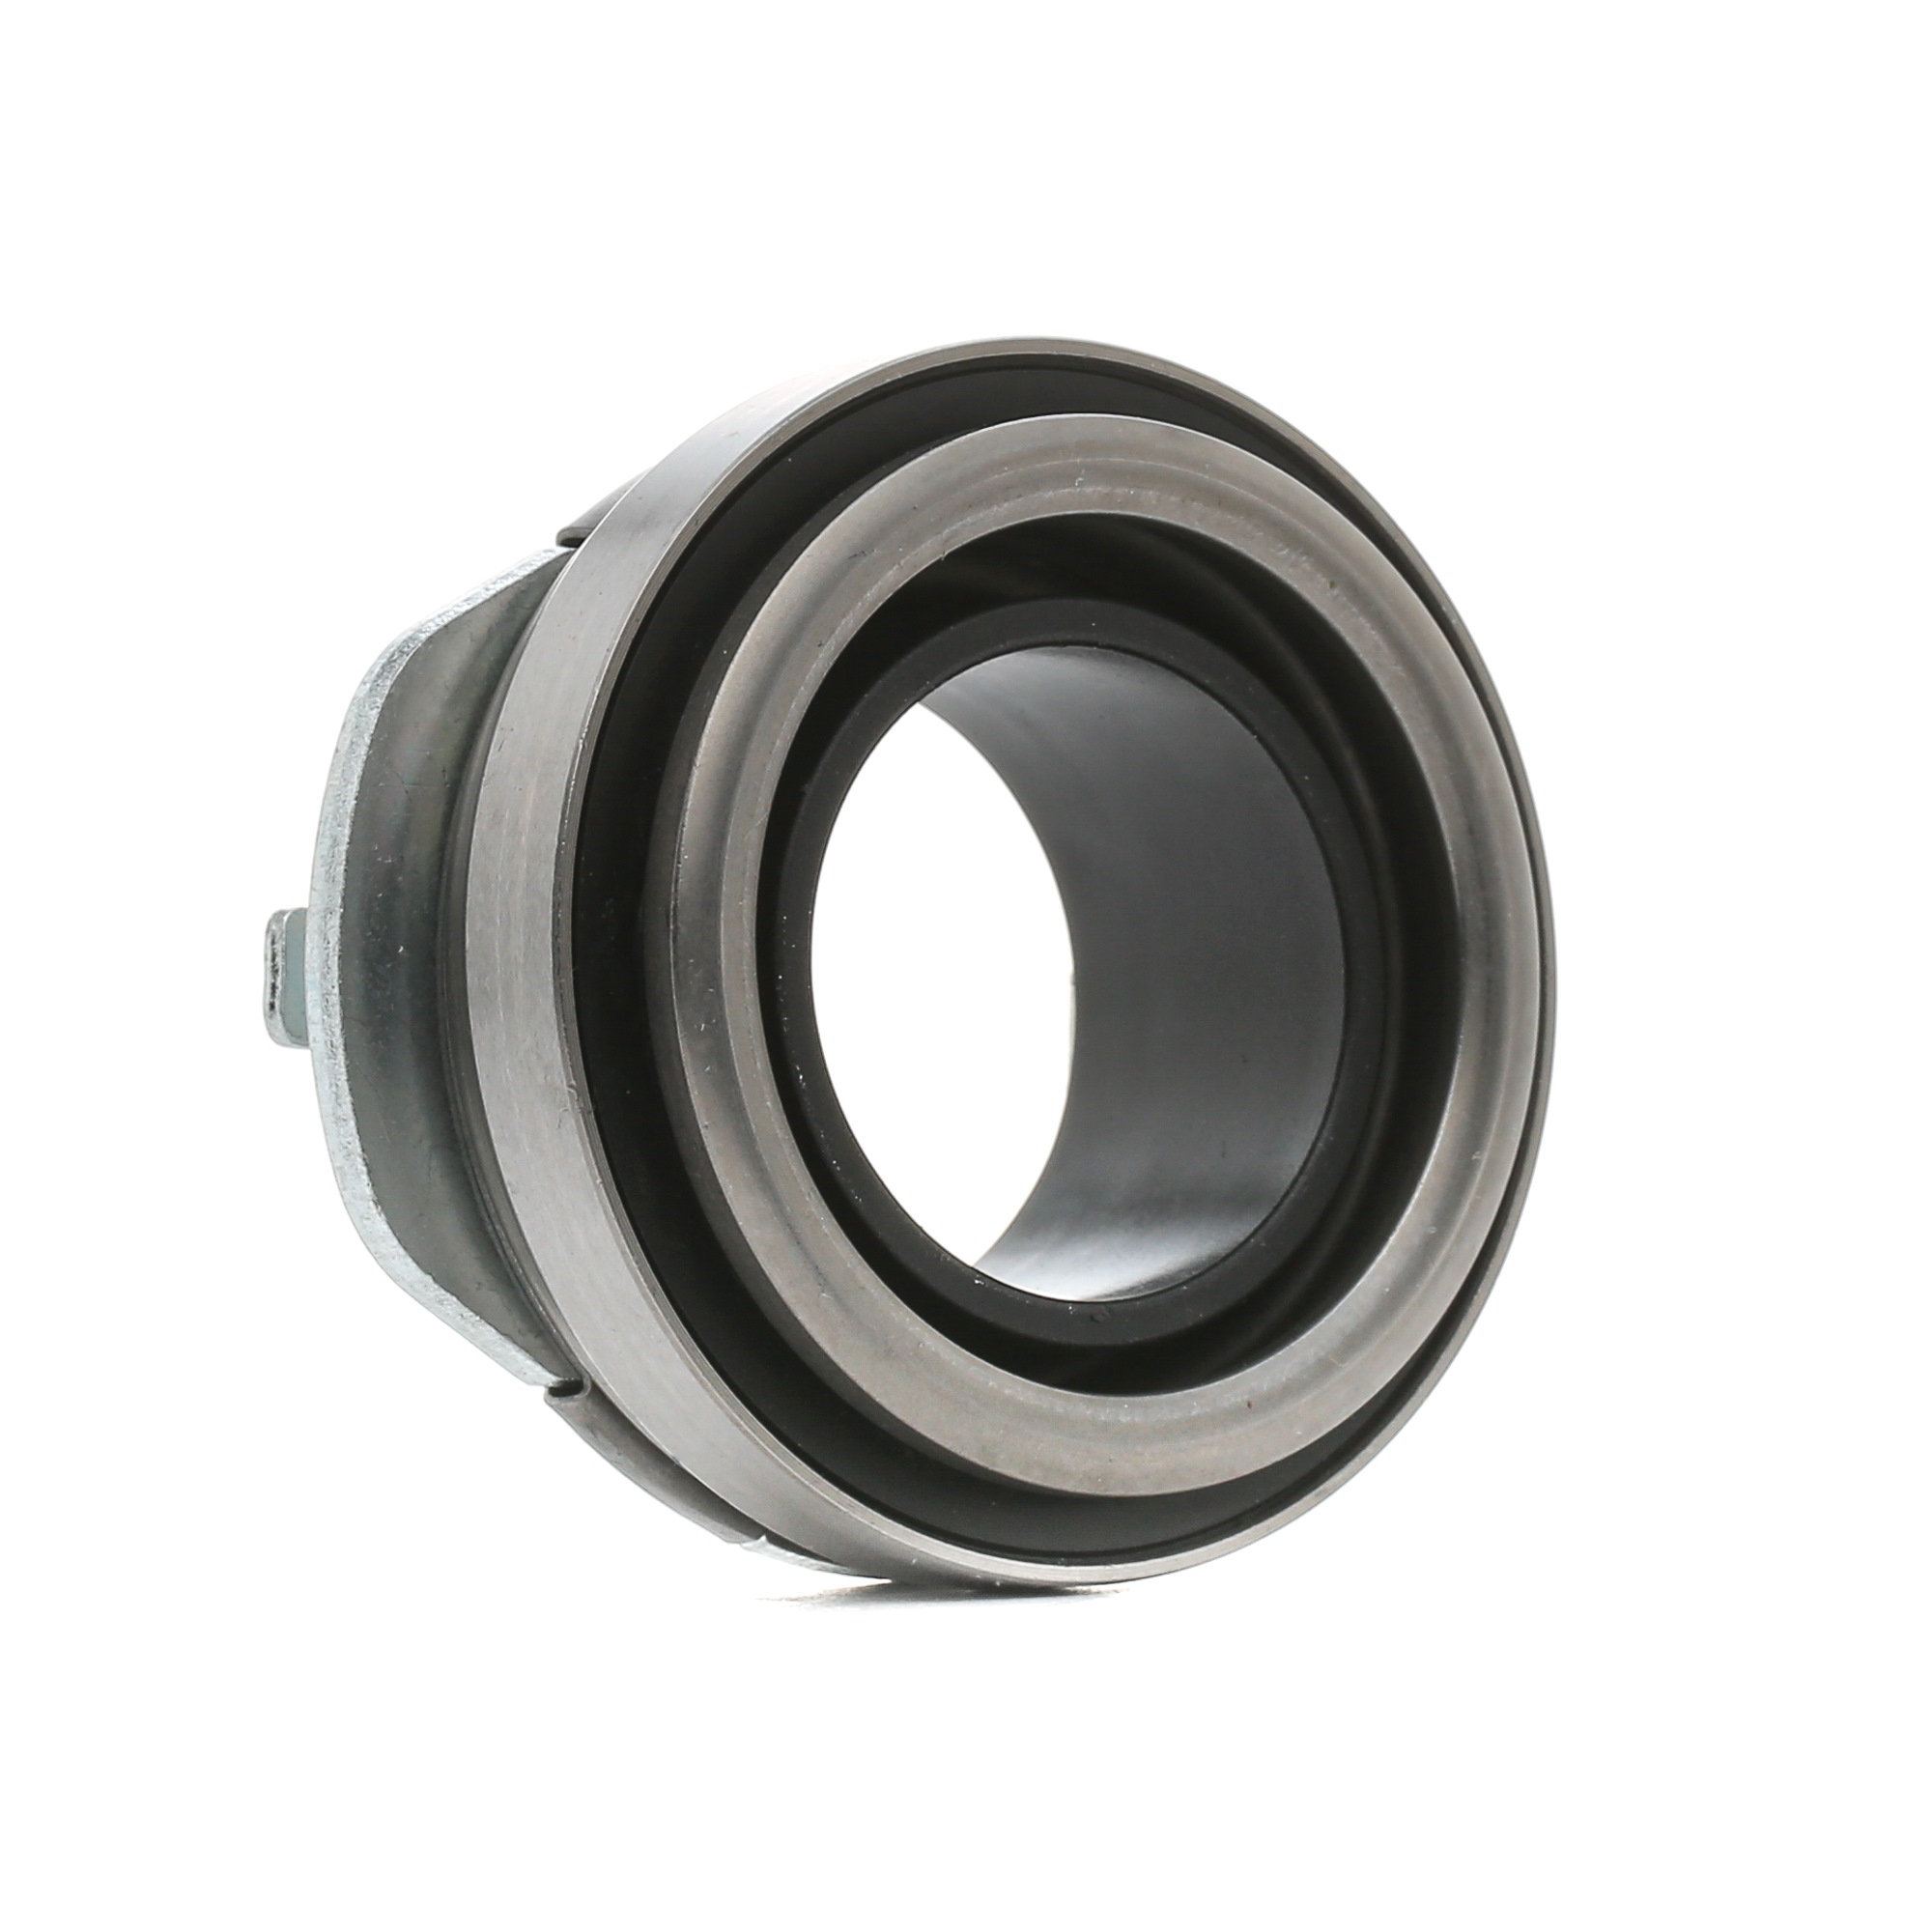 Image of SACHS Clutch Release Bearing HYUNDAI,KIA 3151 654 318 4142123010,4142123020,4142132000 Clutch Bearing,Release Bearing,Releaser 4142123010,4142123020